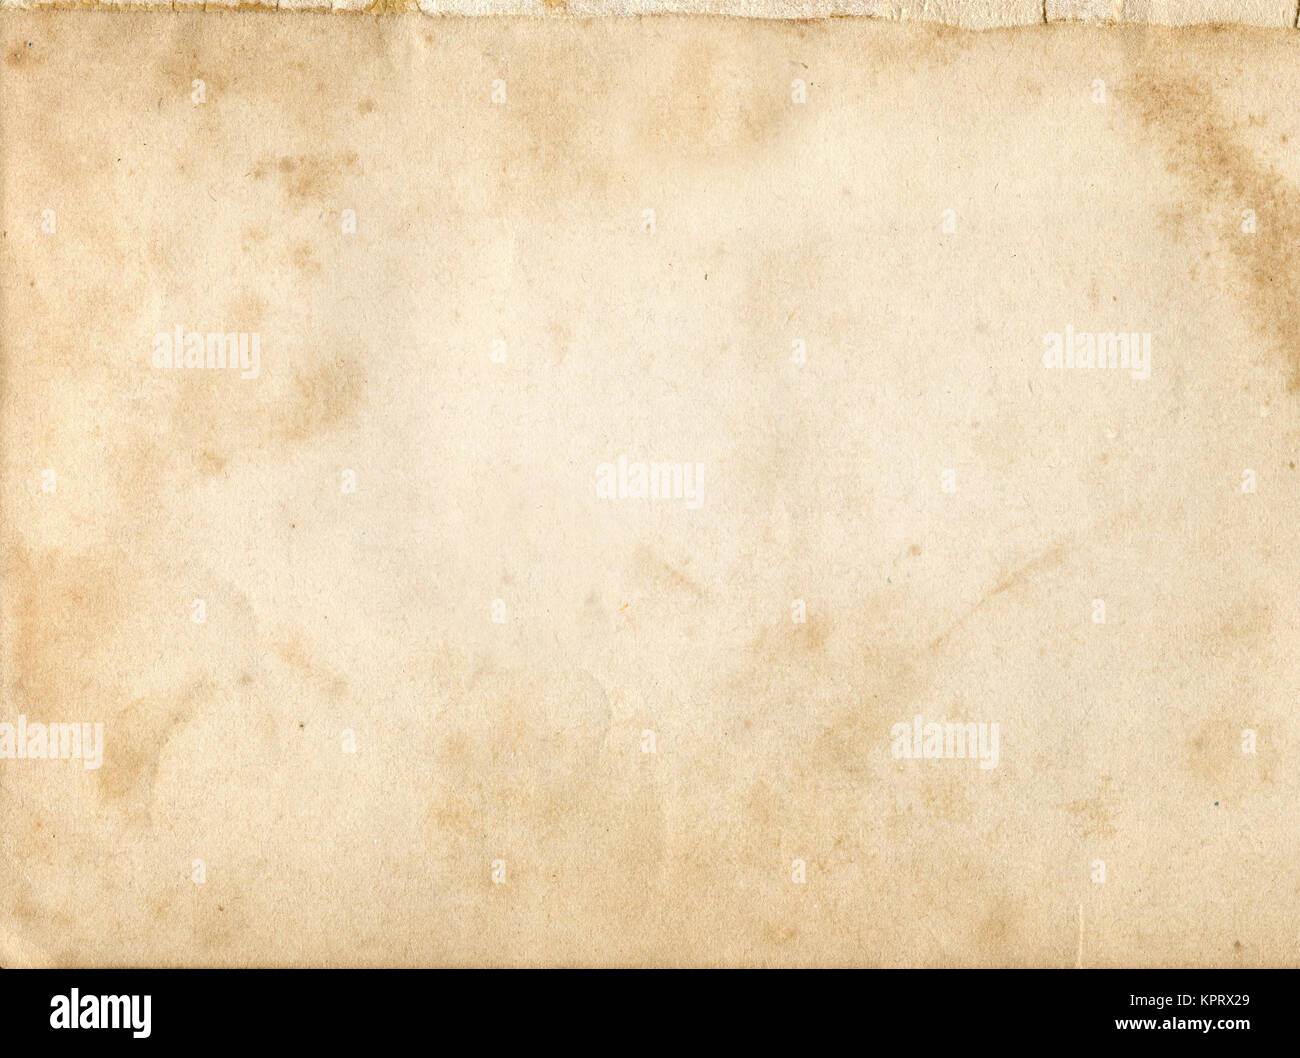 Aging dirty paper background for the design. Natural old paper texture. Stock Photo